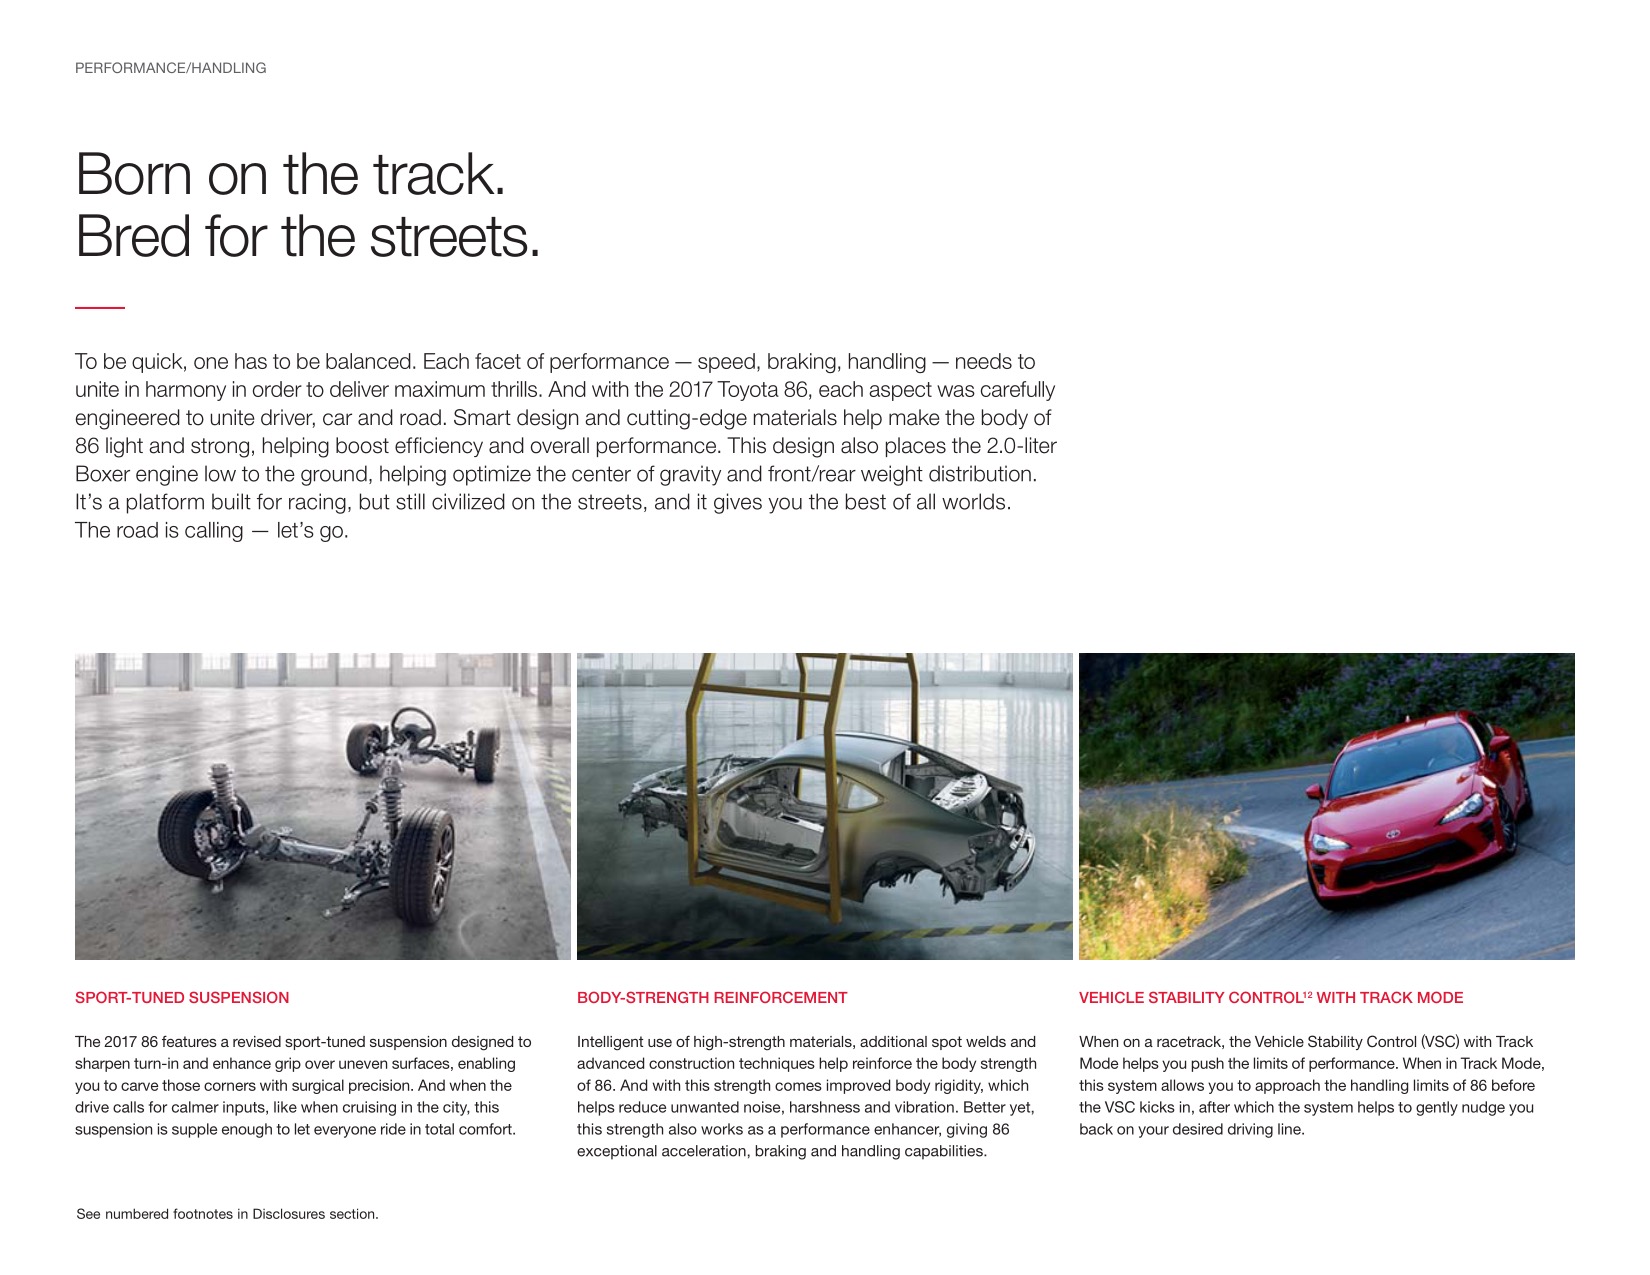 2017 Toyota 86 Brochure Page 12